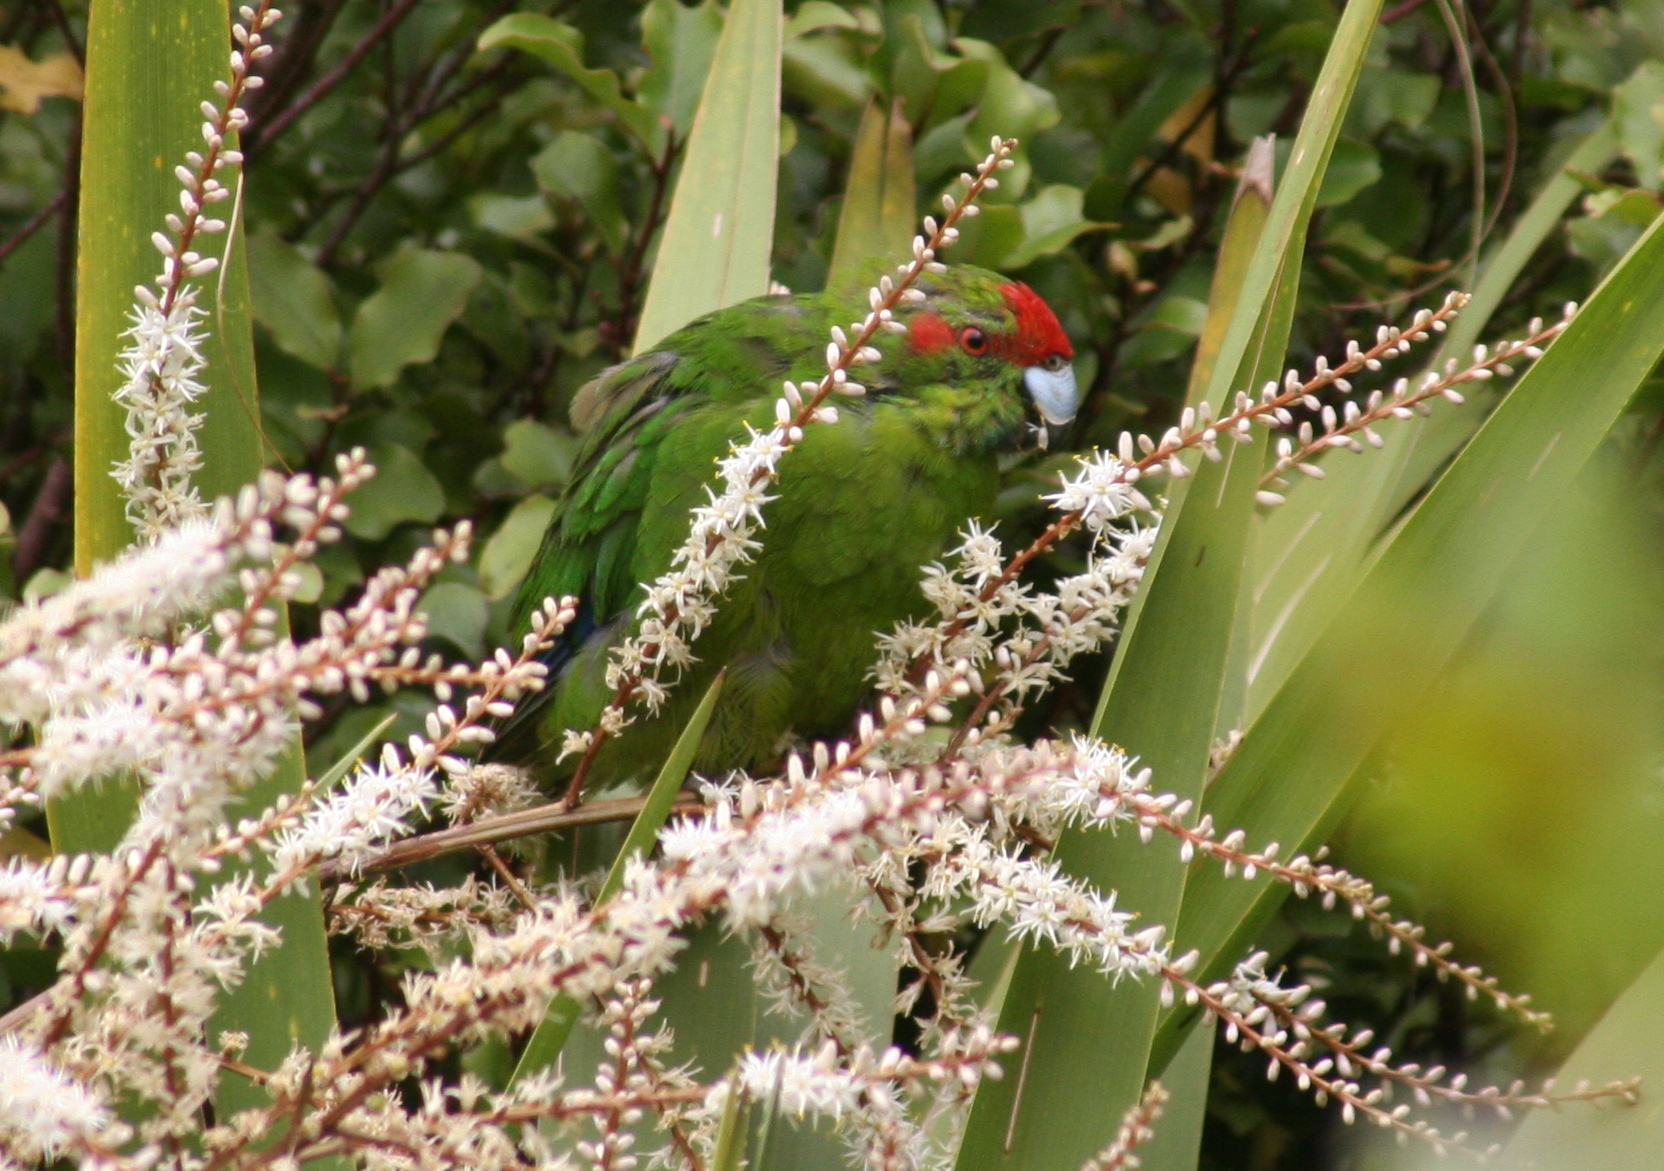 The Red-crowned Parakeet is also known as the kakariki, which doubles as the Maori word for green